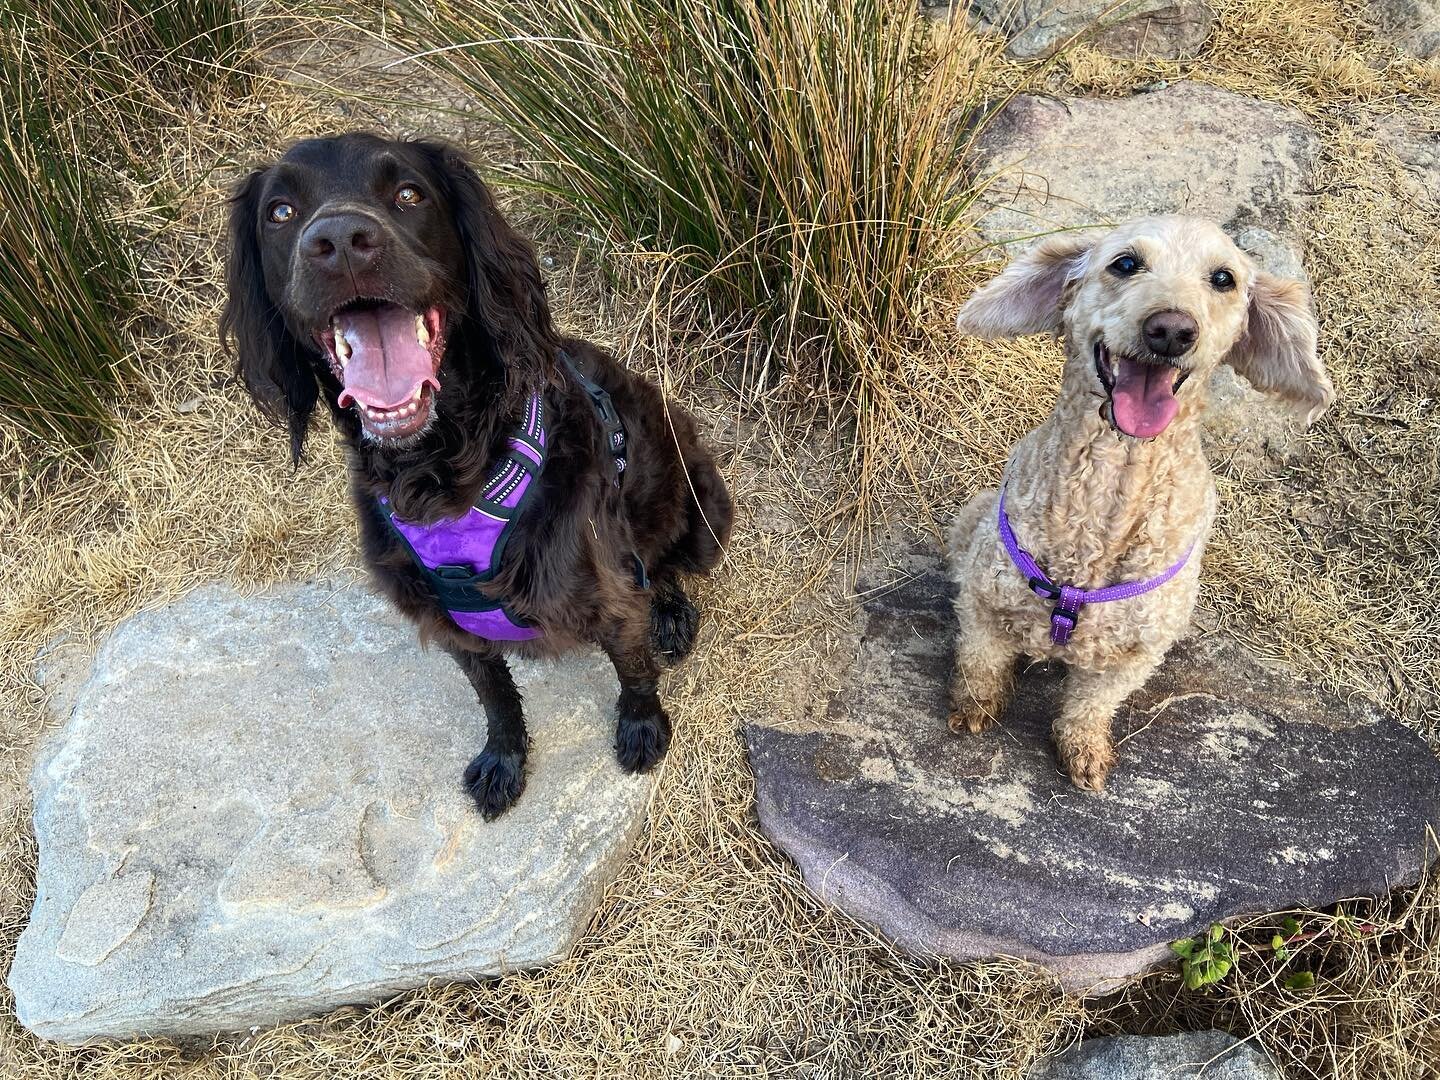 Cheers to 2023 being full of smiling dogs, long walks, wagging tails, and many new four-legged friends. 

#petaupair #dog #dogsofsydney #spoodle #groodle #springerspaniel #northernbeaches #northernbeachesmums #northernbeachessydney #longreef #curlcur